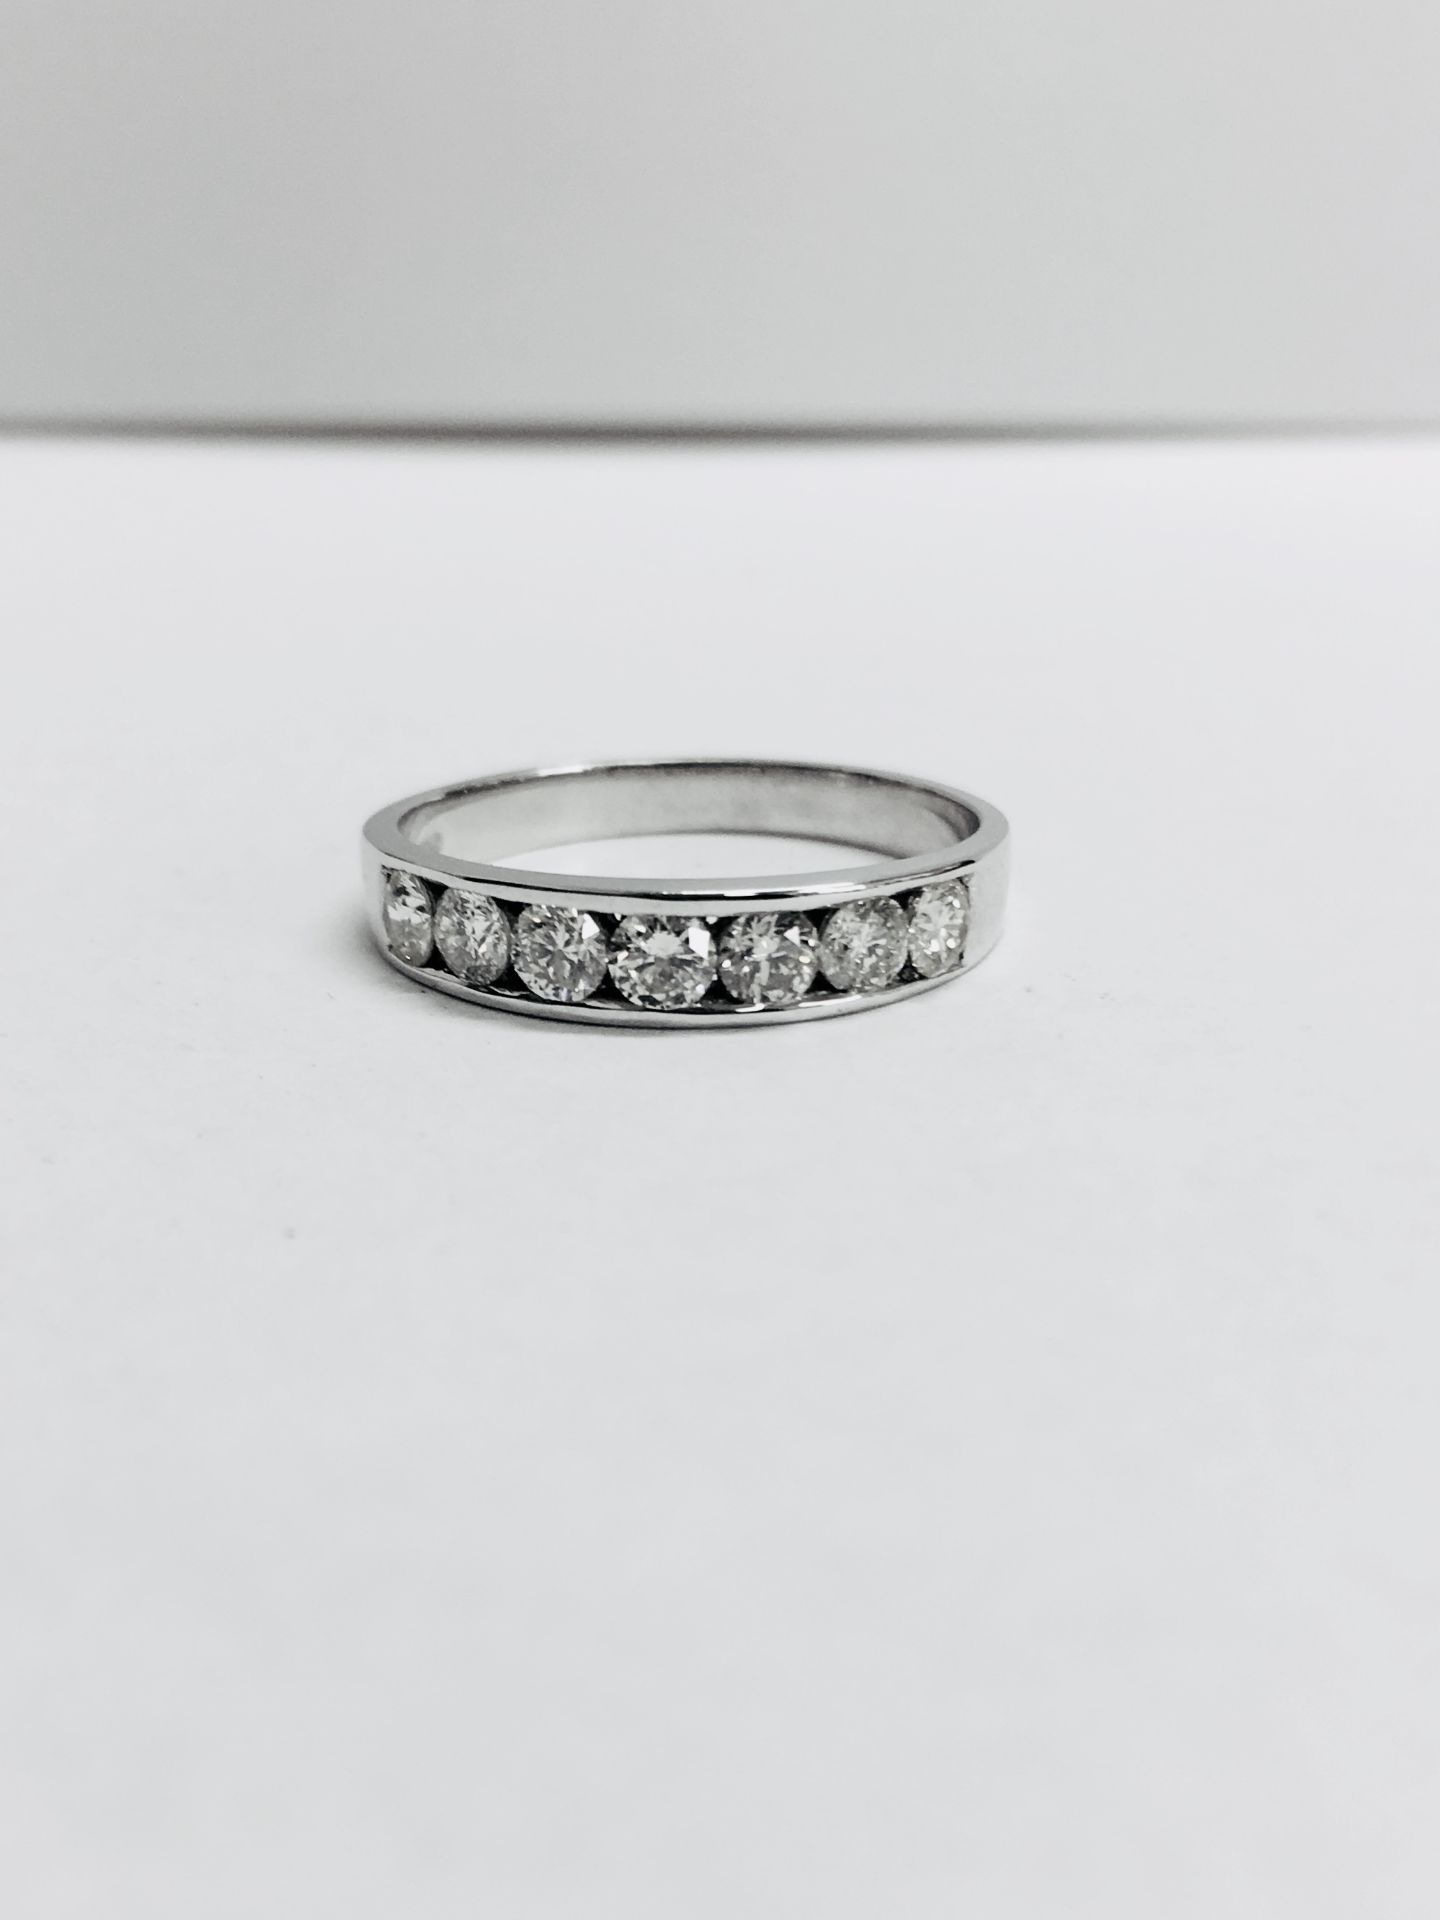 0.70ct diamond eternity style band ring. Set with 7 brilliant cut diamonds, I, si3 clarity. - Image 2 of 4